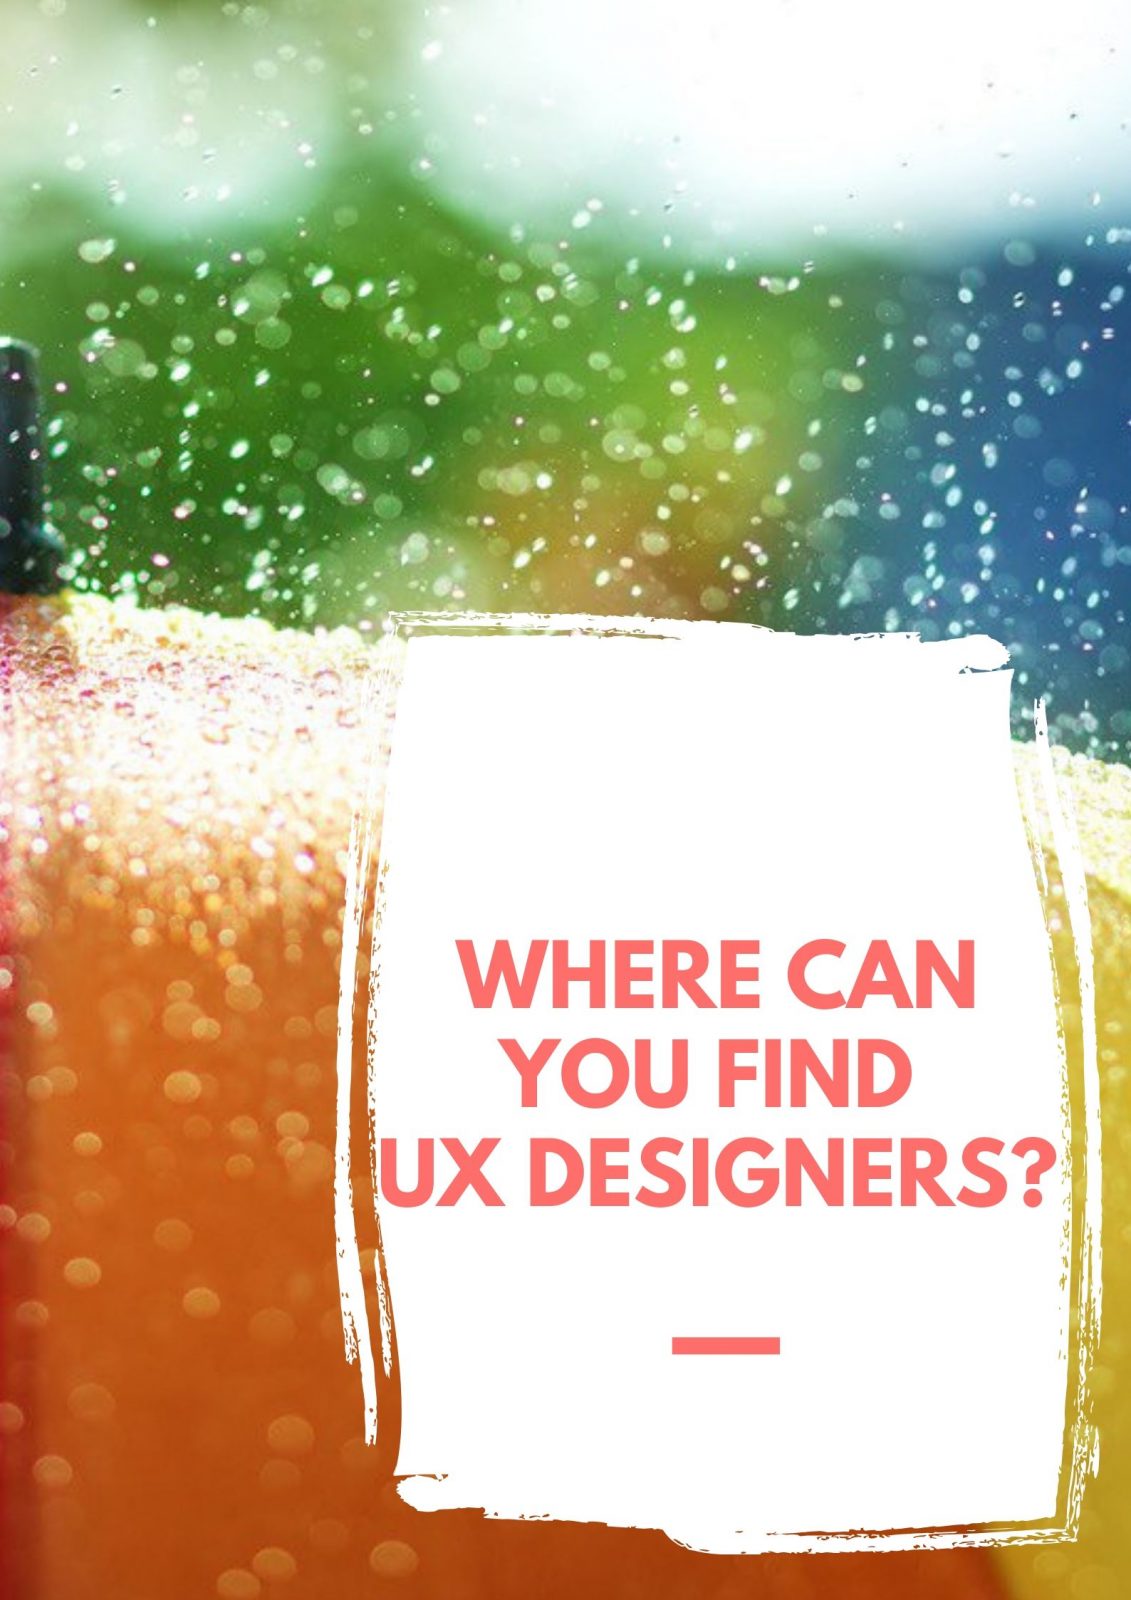 Where Can You Find UX Designers?